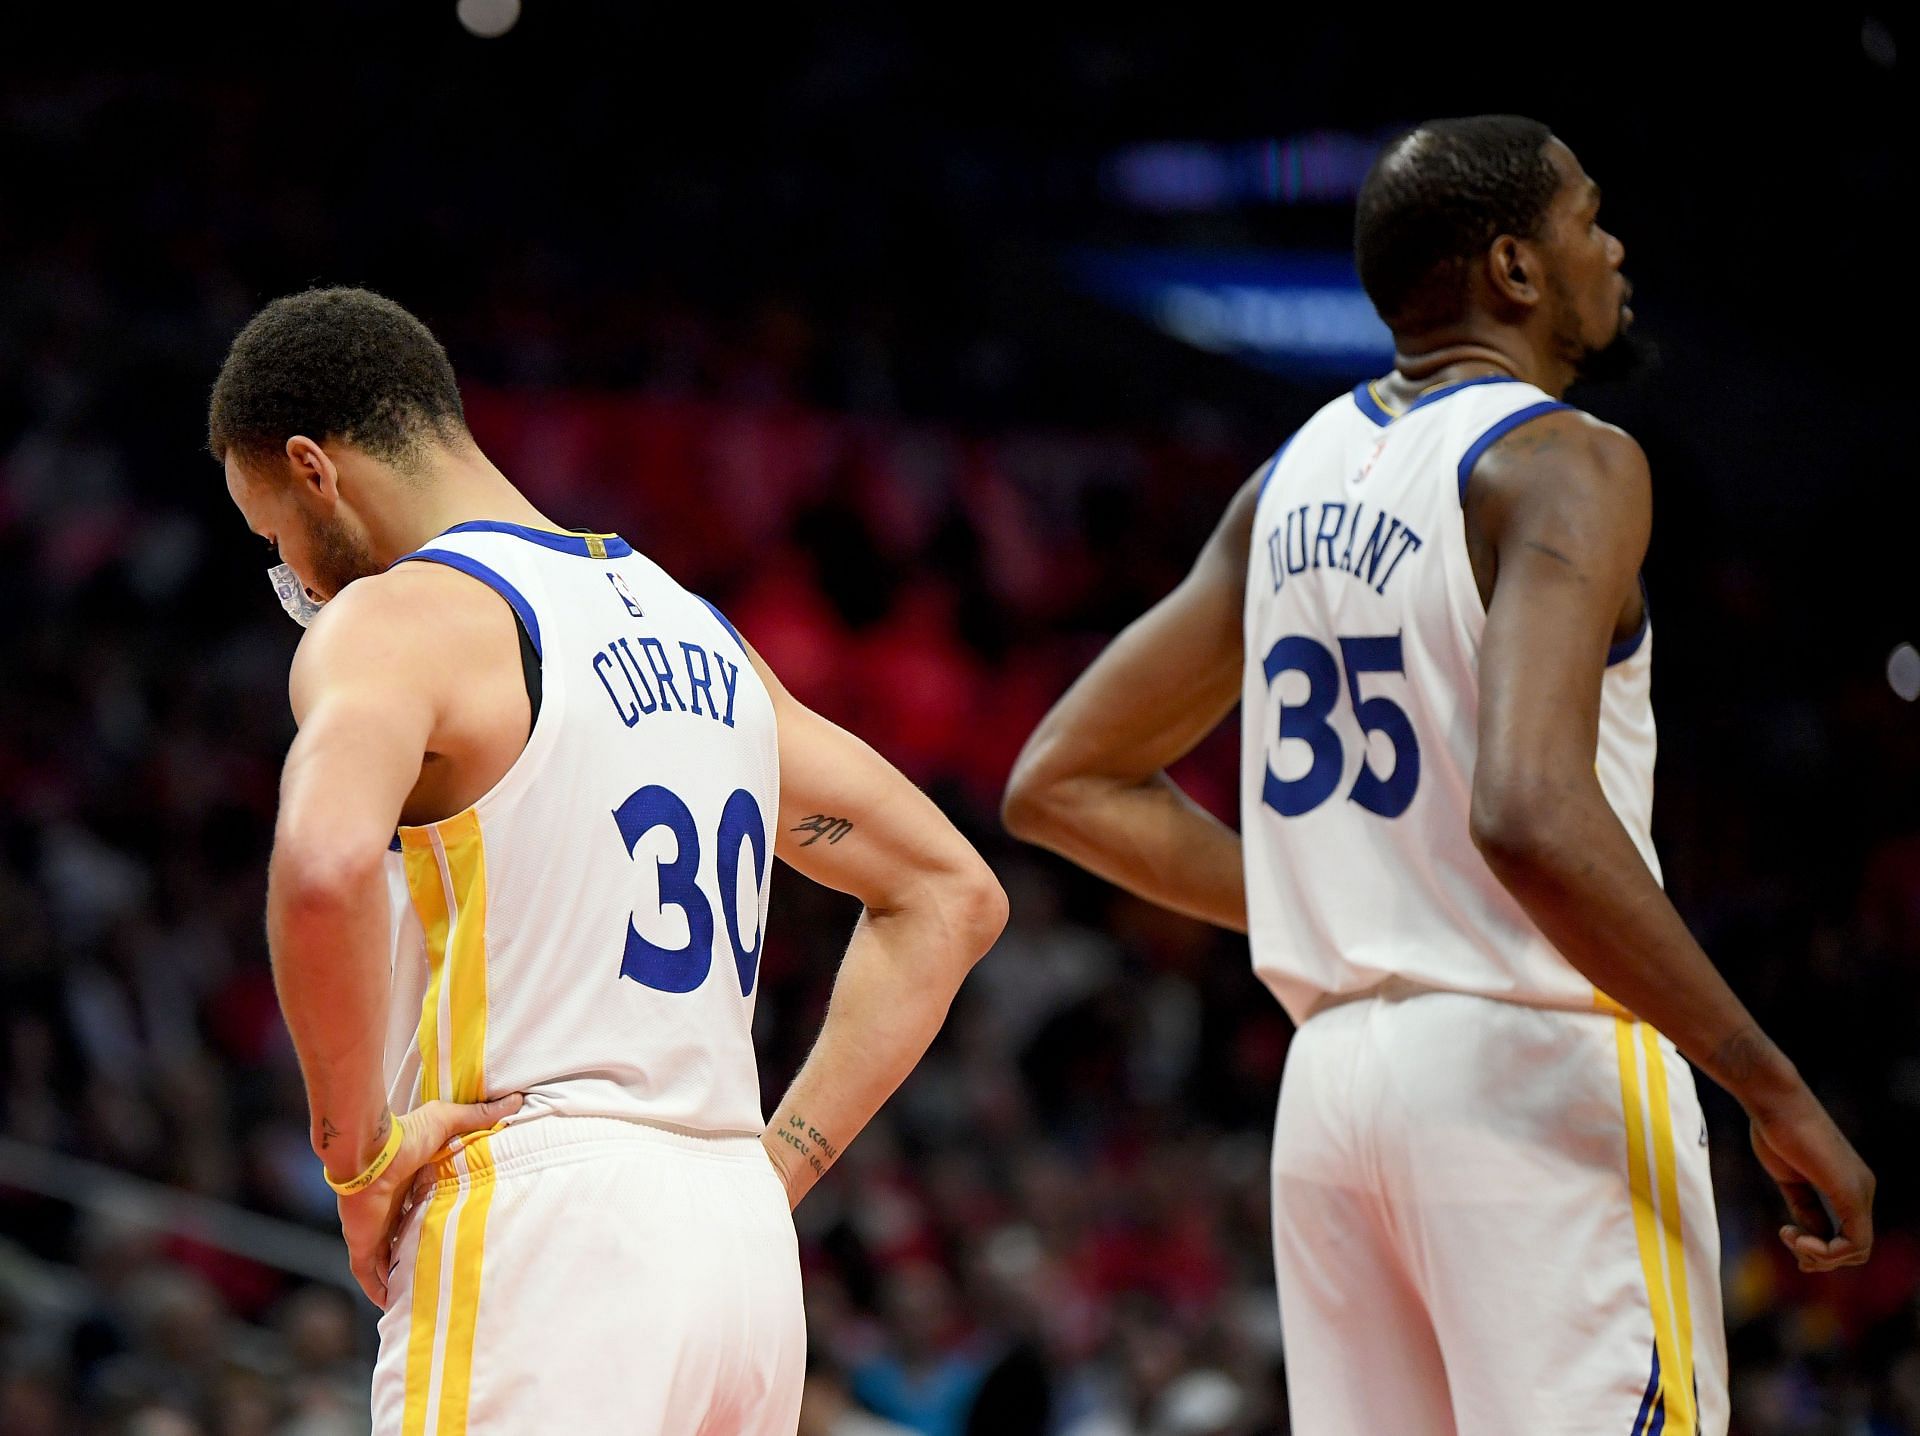 Stephen Curry #30 and Kevin Durant #35 of the Golden State Warriors in a 129-110 win over the LA Clippers during Game Six of Round One of the 2019 NBA Playoffs at Staples Center on April 26, 2019 in Los Angeles, California.